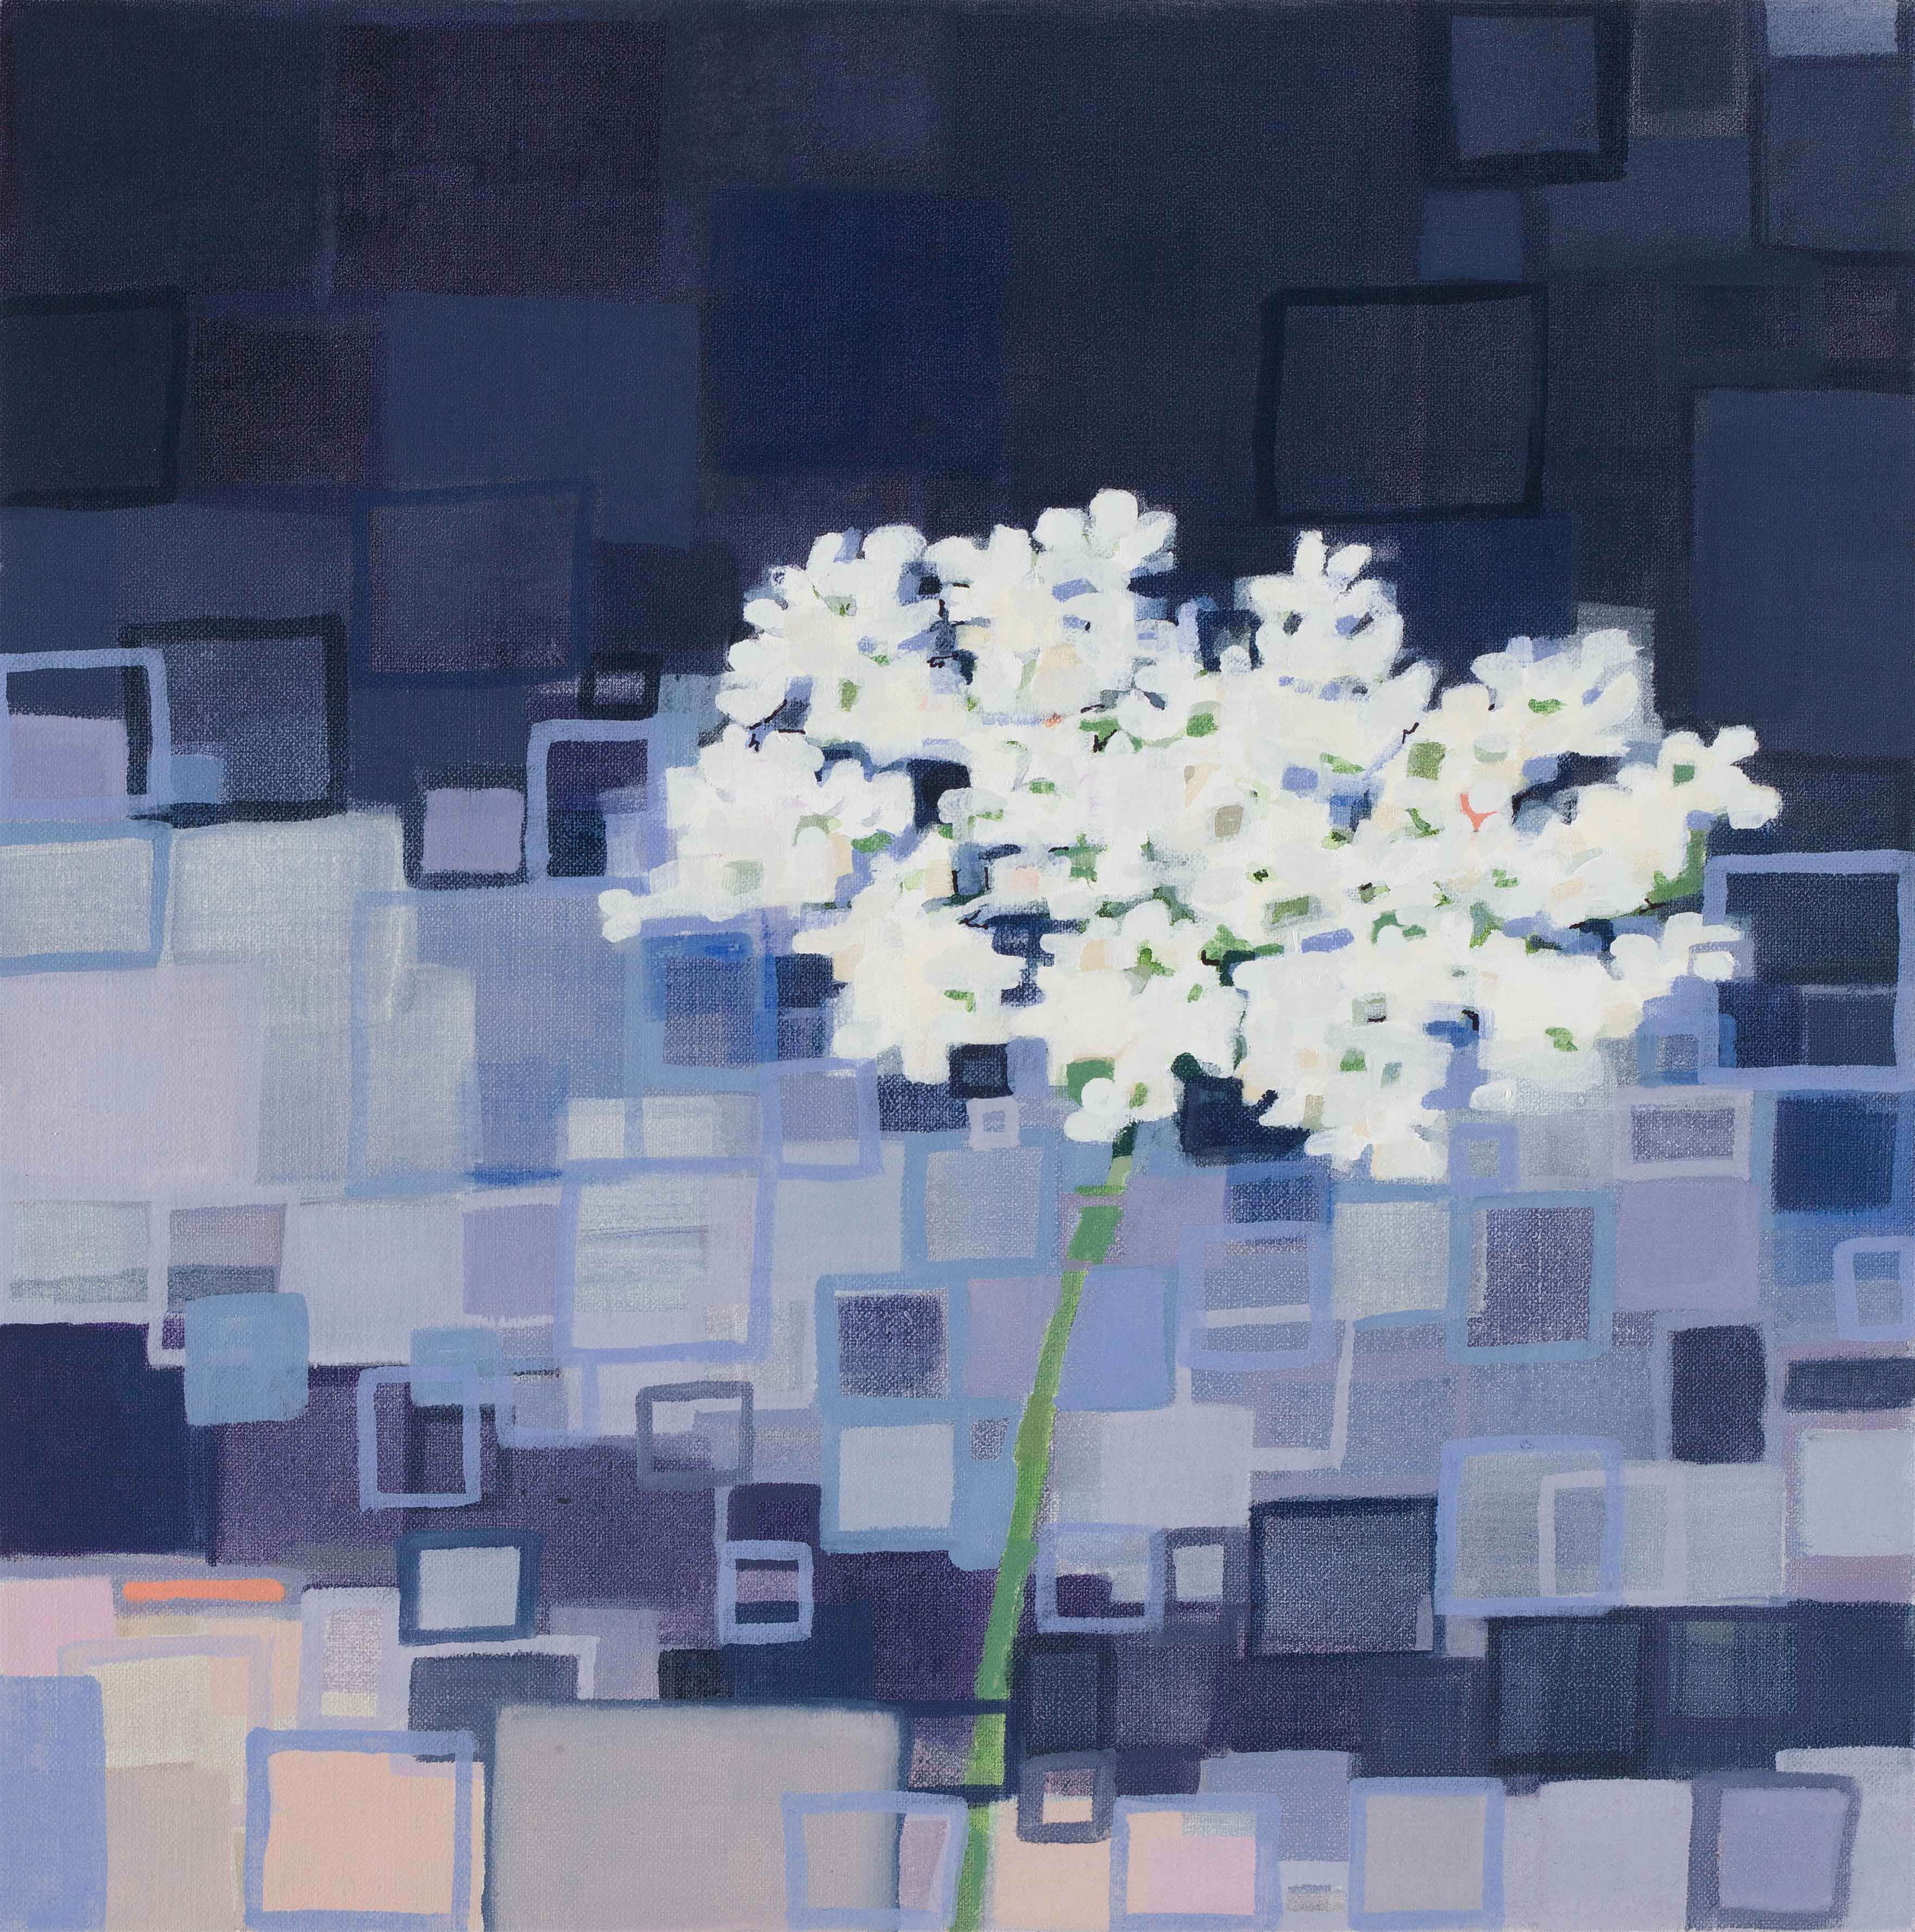 Wild Carrot-Queen Anne's Lace, 8/5/19, 11:43, 43.530125, -70.310397, 2020, oil on canvas, 12 x 12 inches